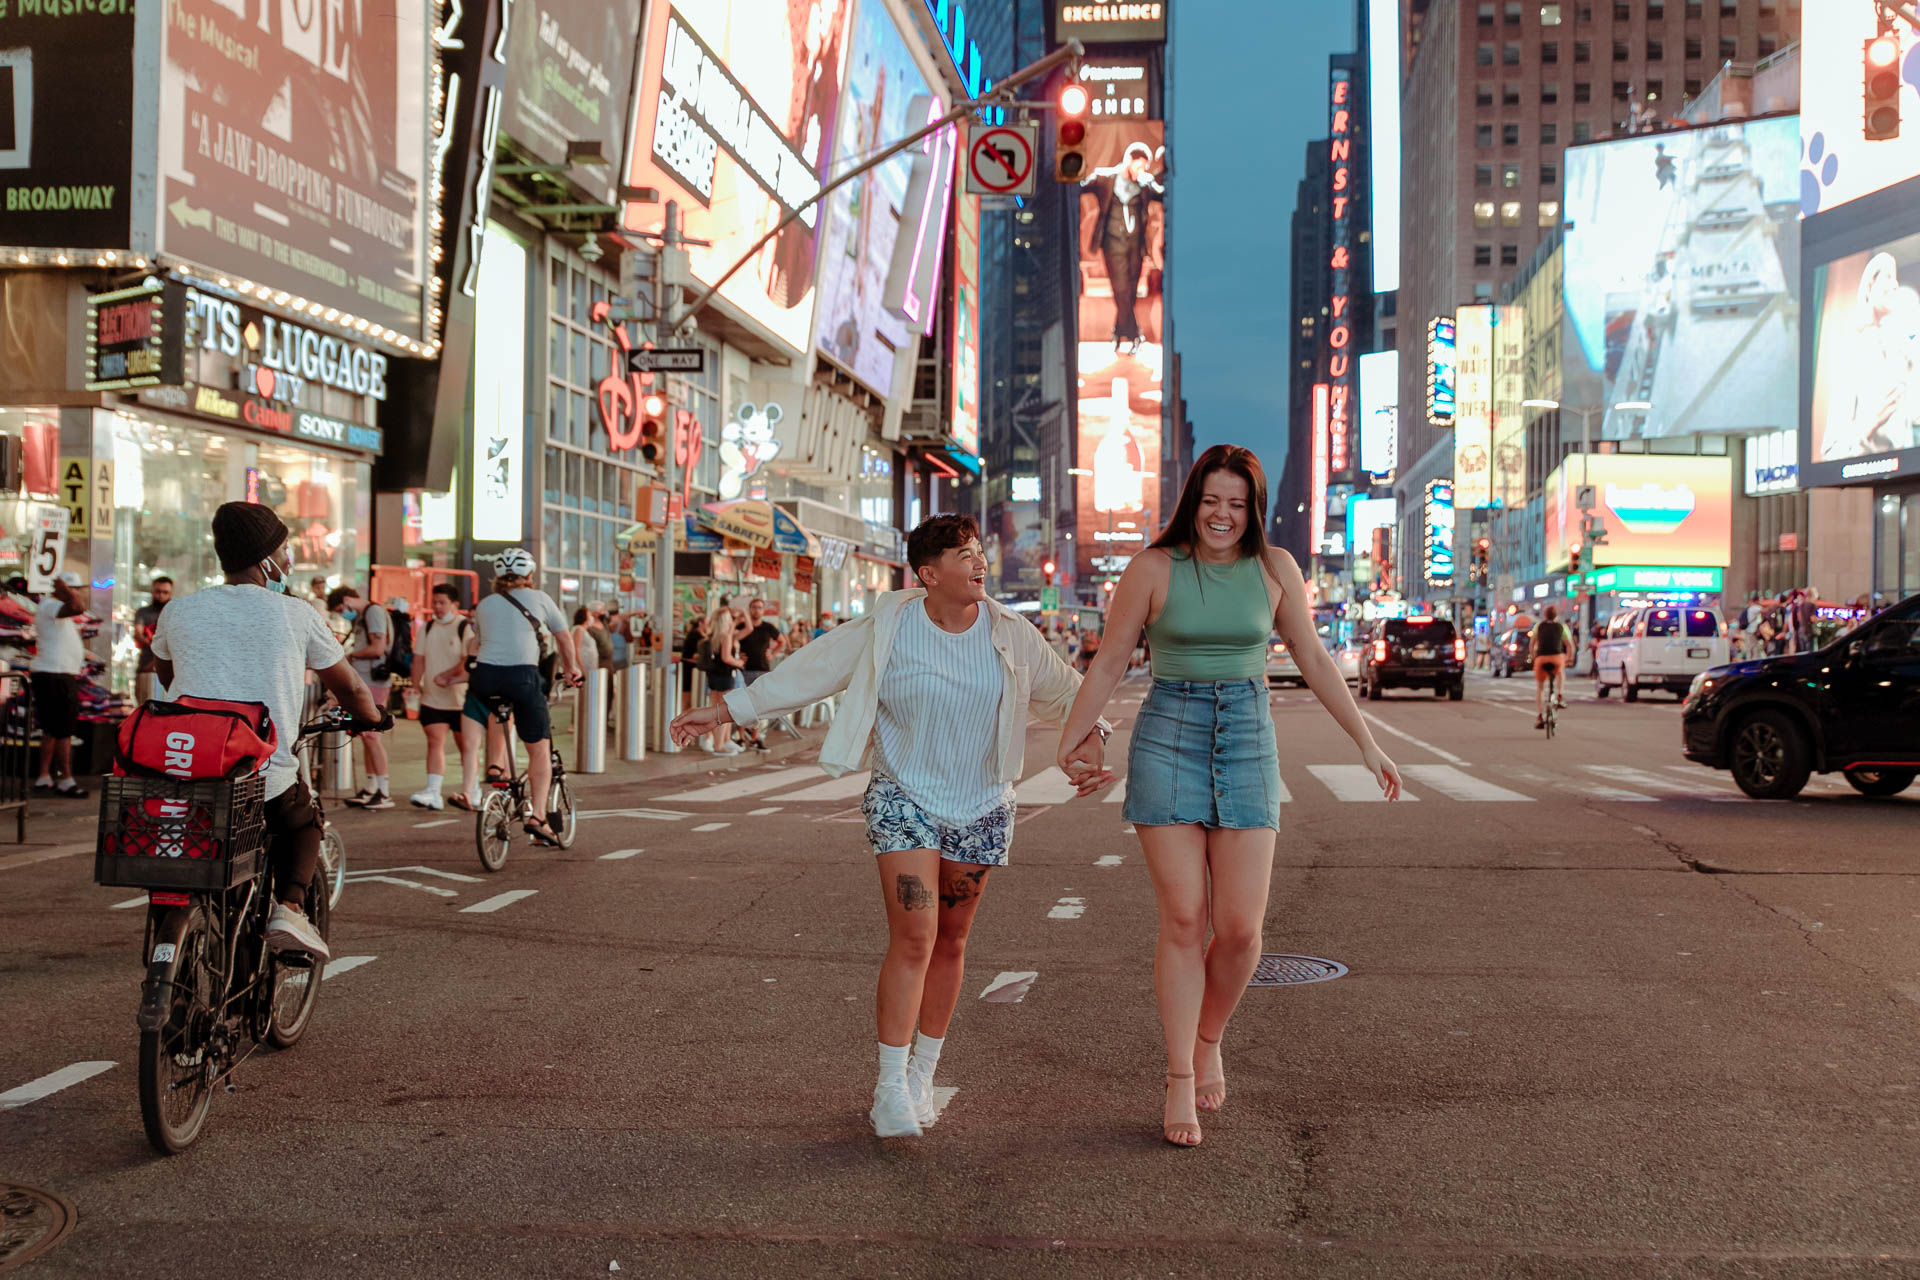 engagement photoshoot in times square